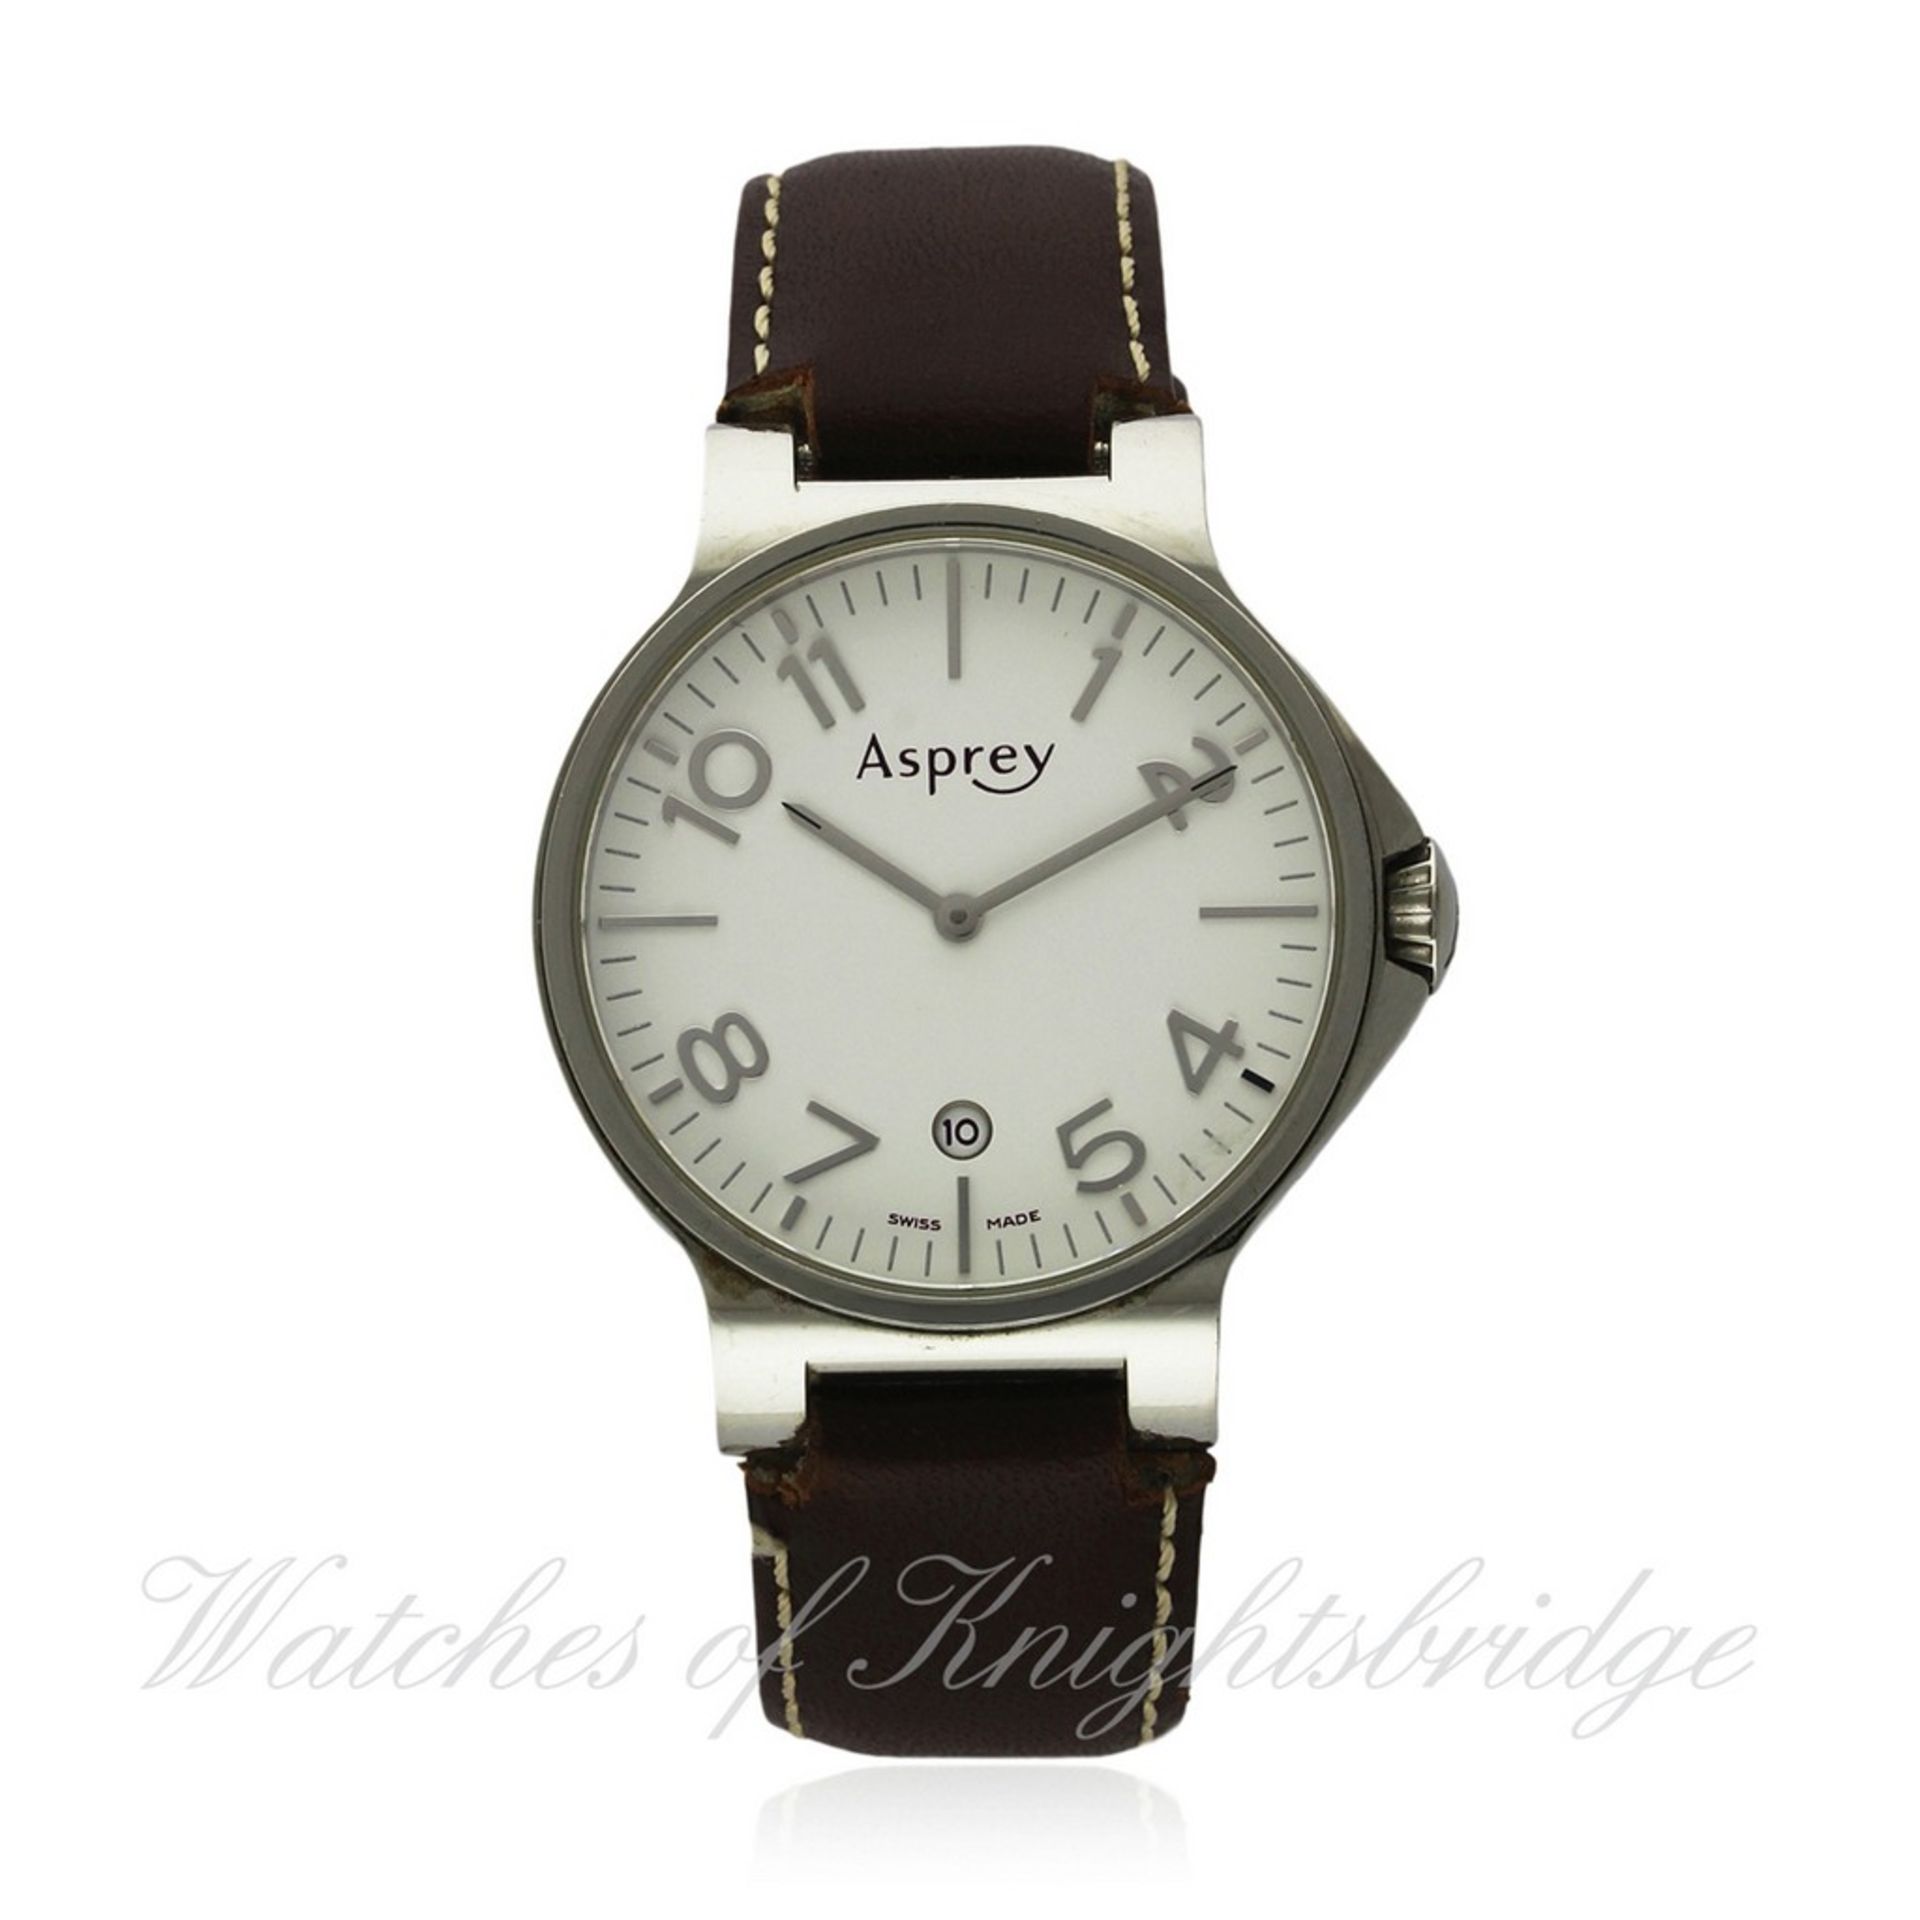 A STAINLESS STEEL ASPREY NO. 8 WRISTWATCH DATED 2010, WITH BOX & PAPERS D: White dial with raised